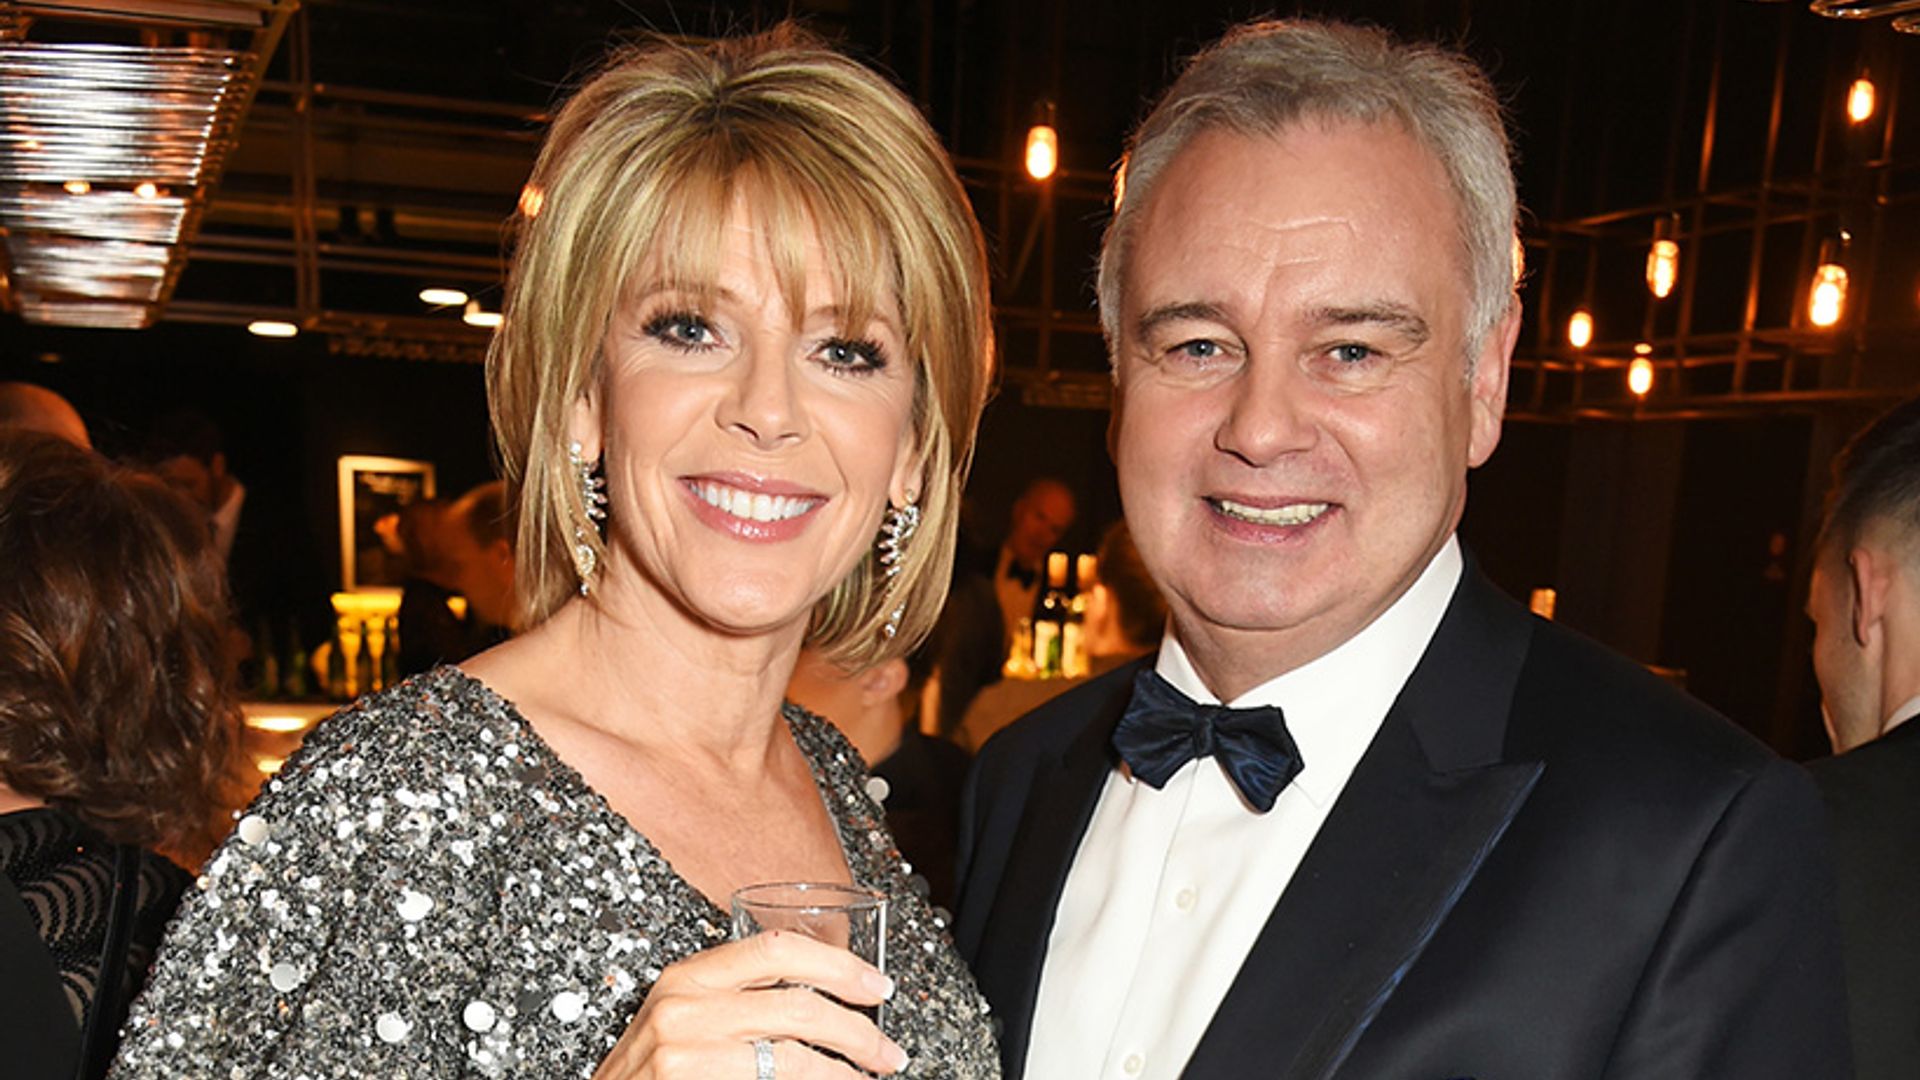 Eamonn Holmes worries wife Ruth Langsford will leave him after Strictly